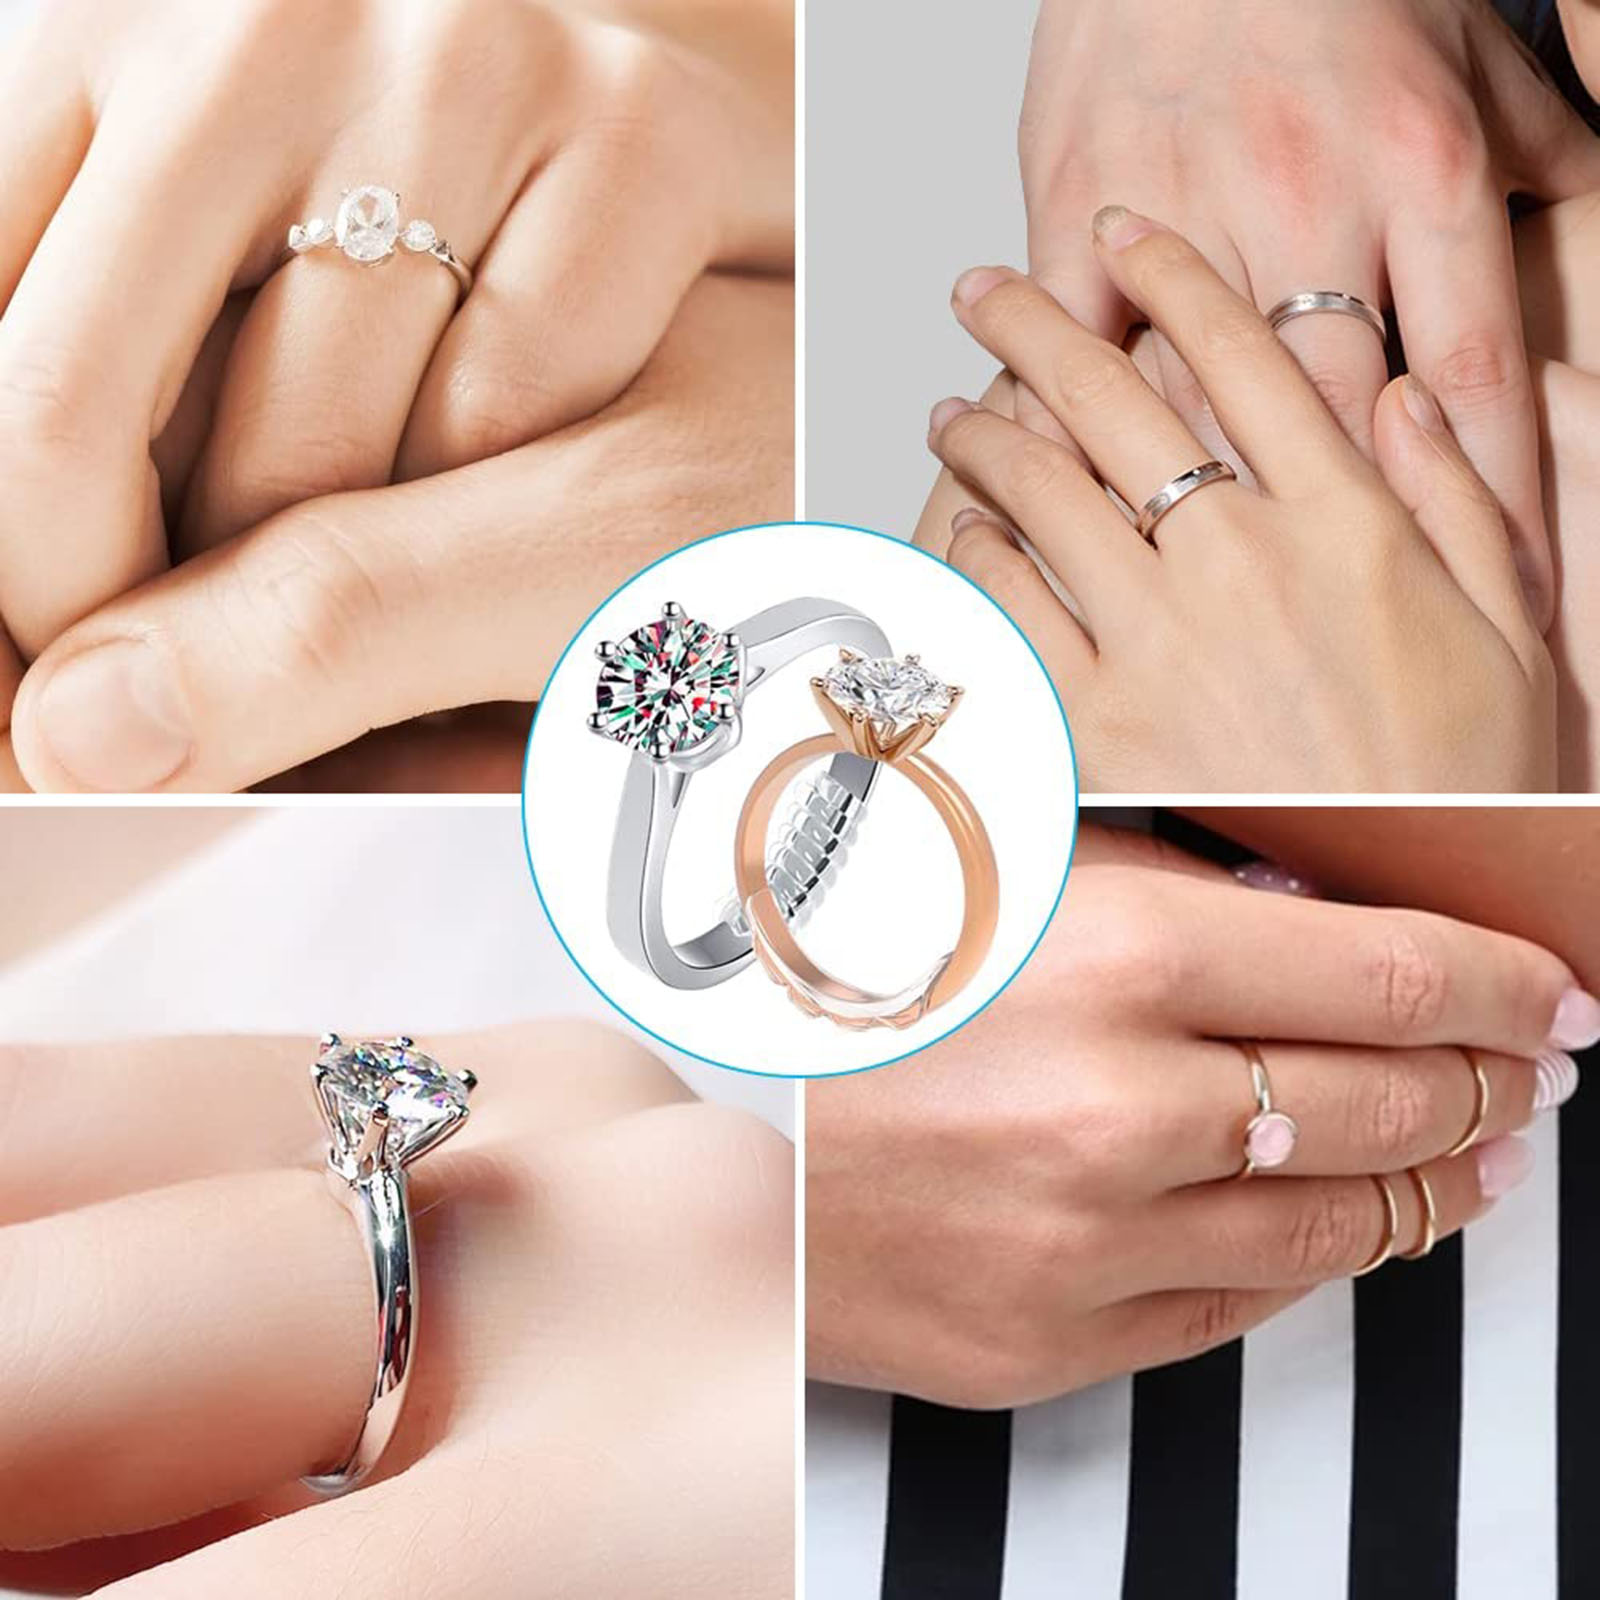 16Pcs Ring Guard Ring Sizer for Loose Rings Ring Size Adjusters for Wedding  Rings 4 Style Ring Spacers Spiral Tightener 